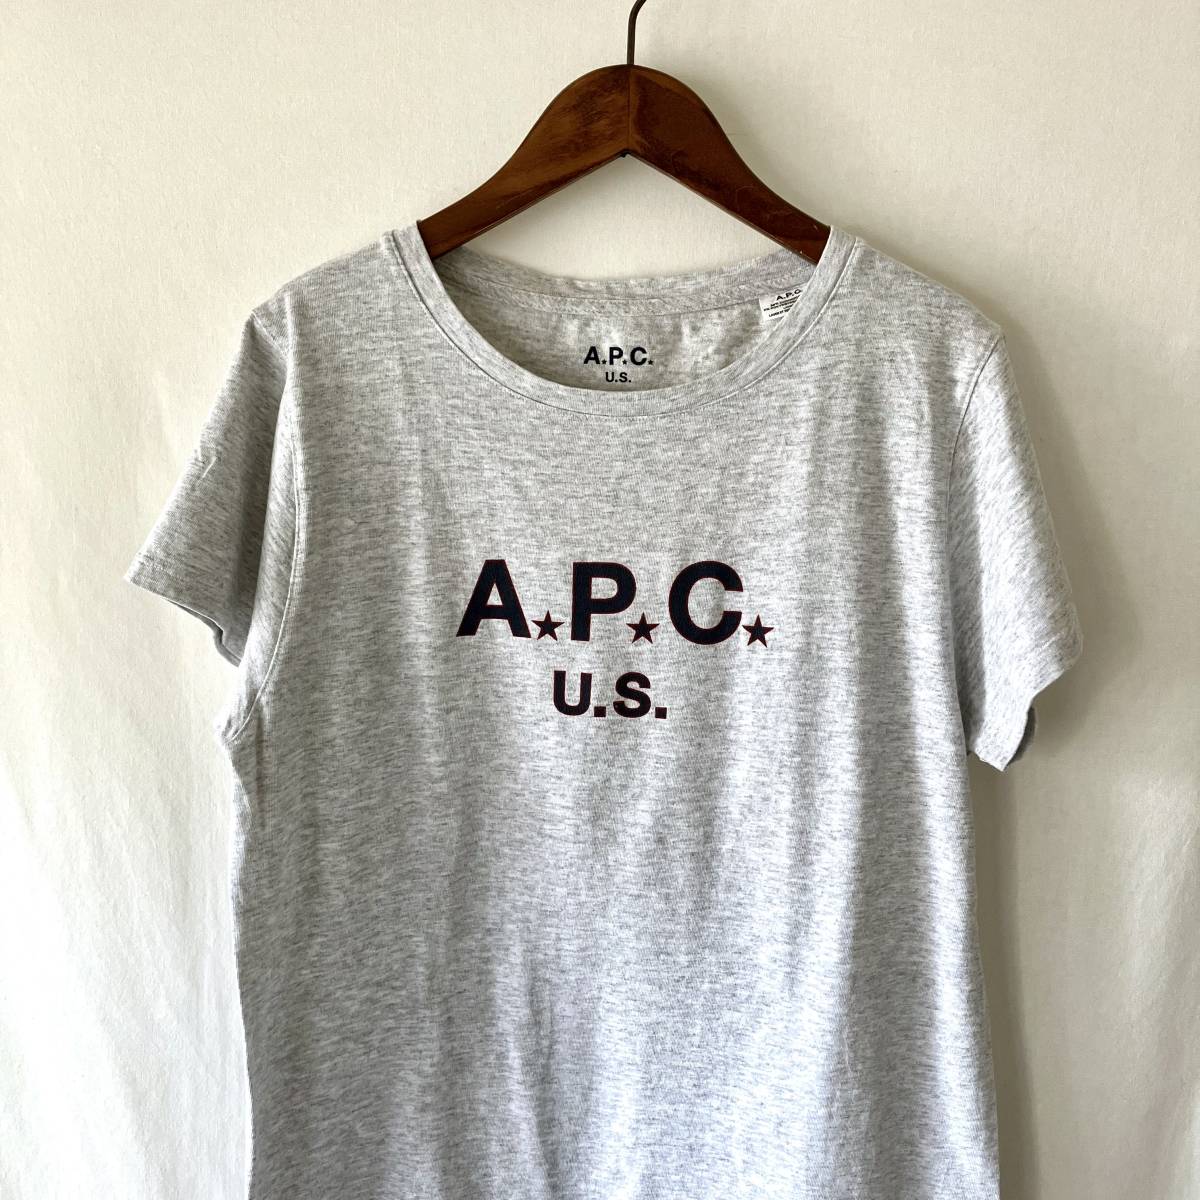 # perhaps unused # regular price 11,000 # A.P.C US collection # US STAR T-shirt S # /